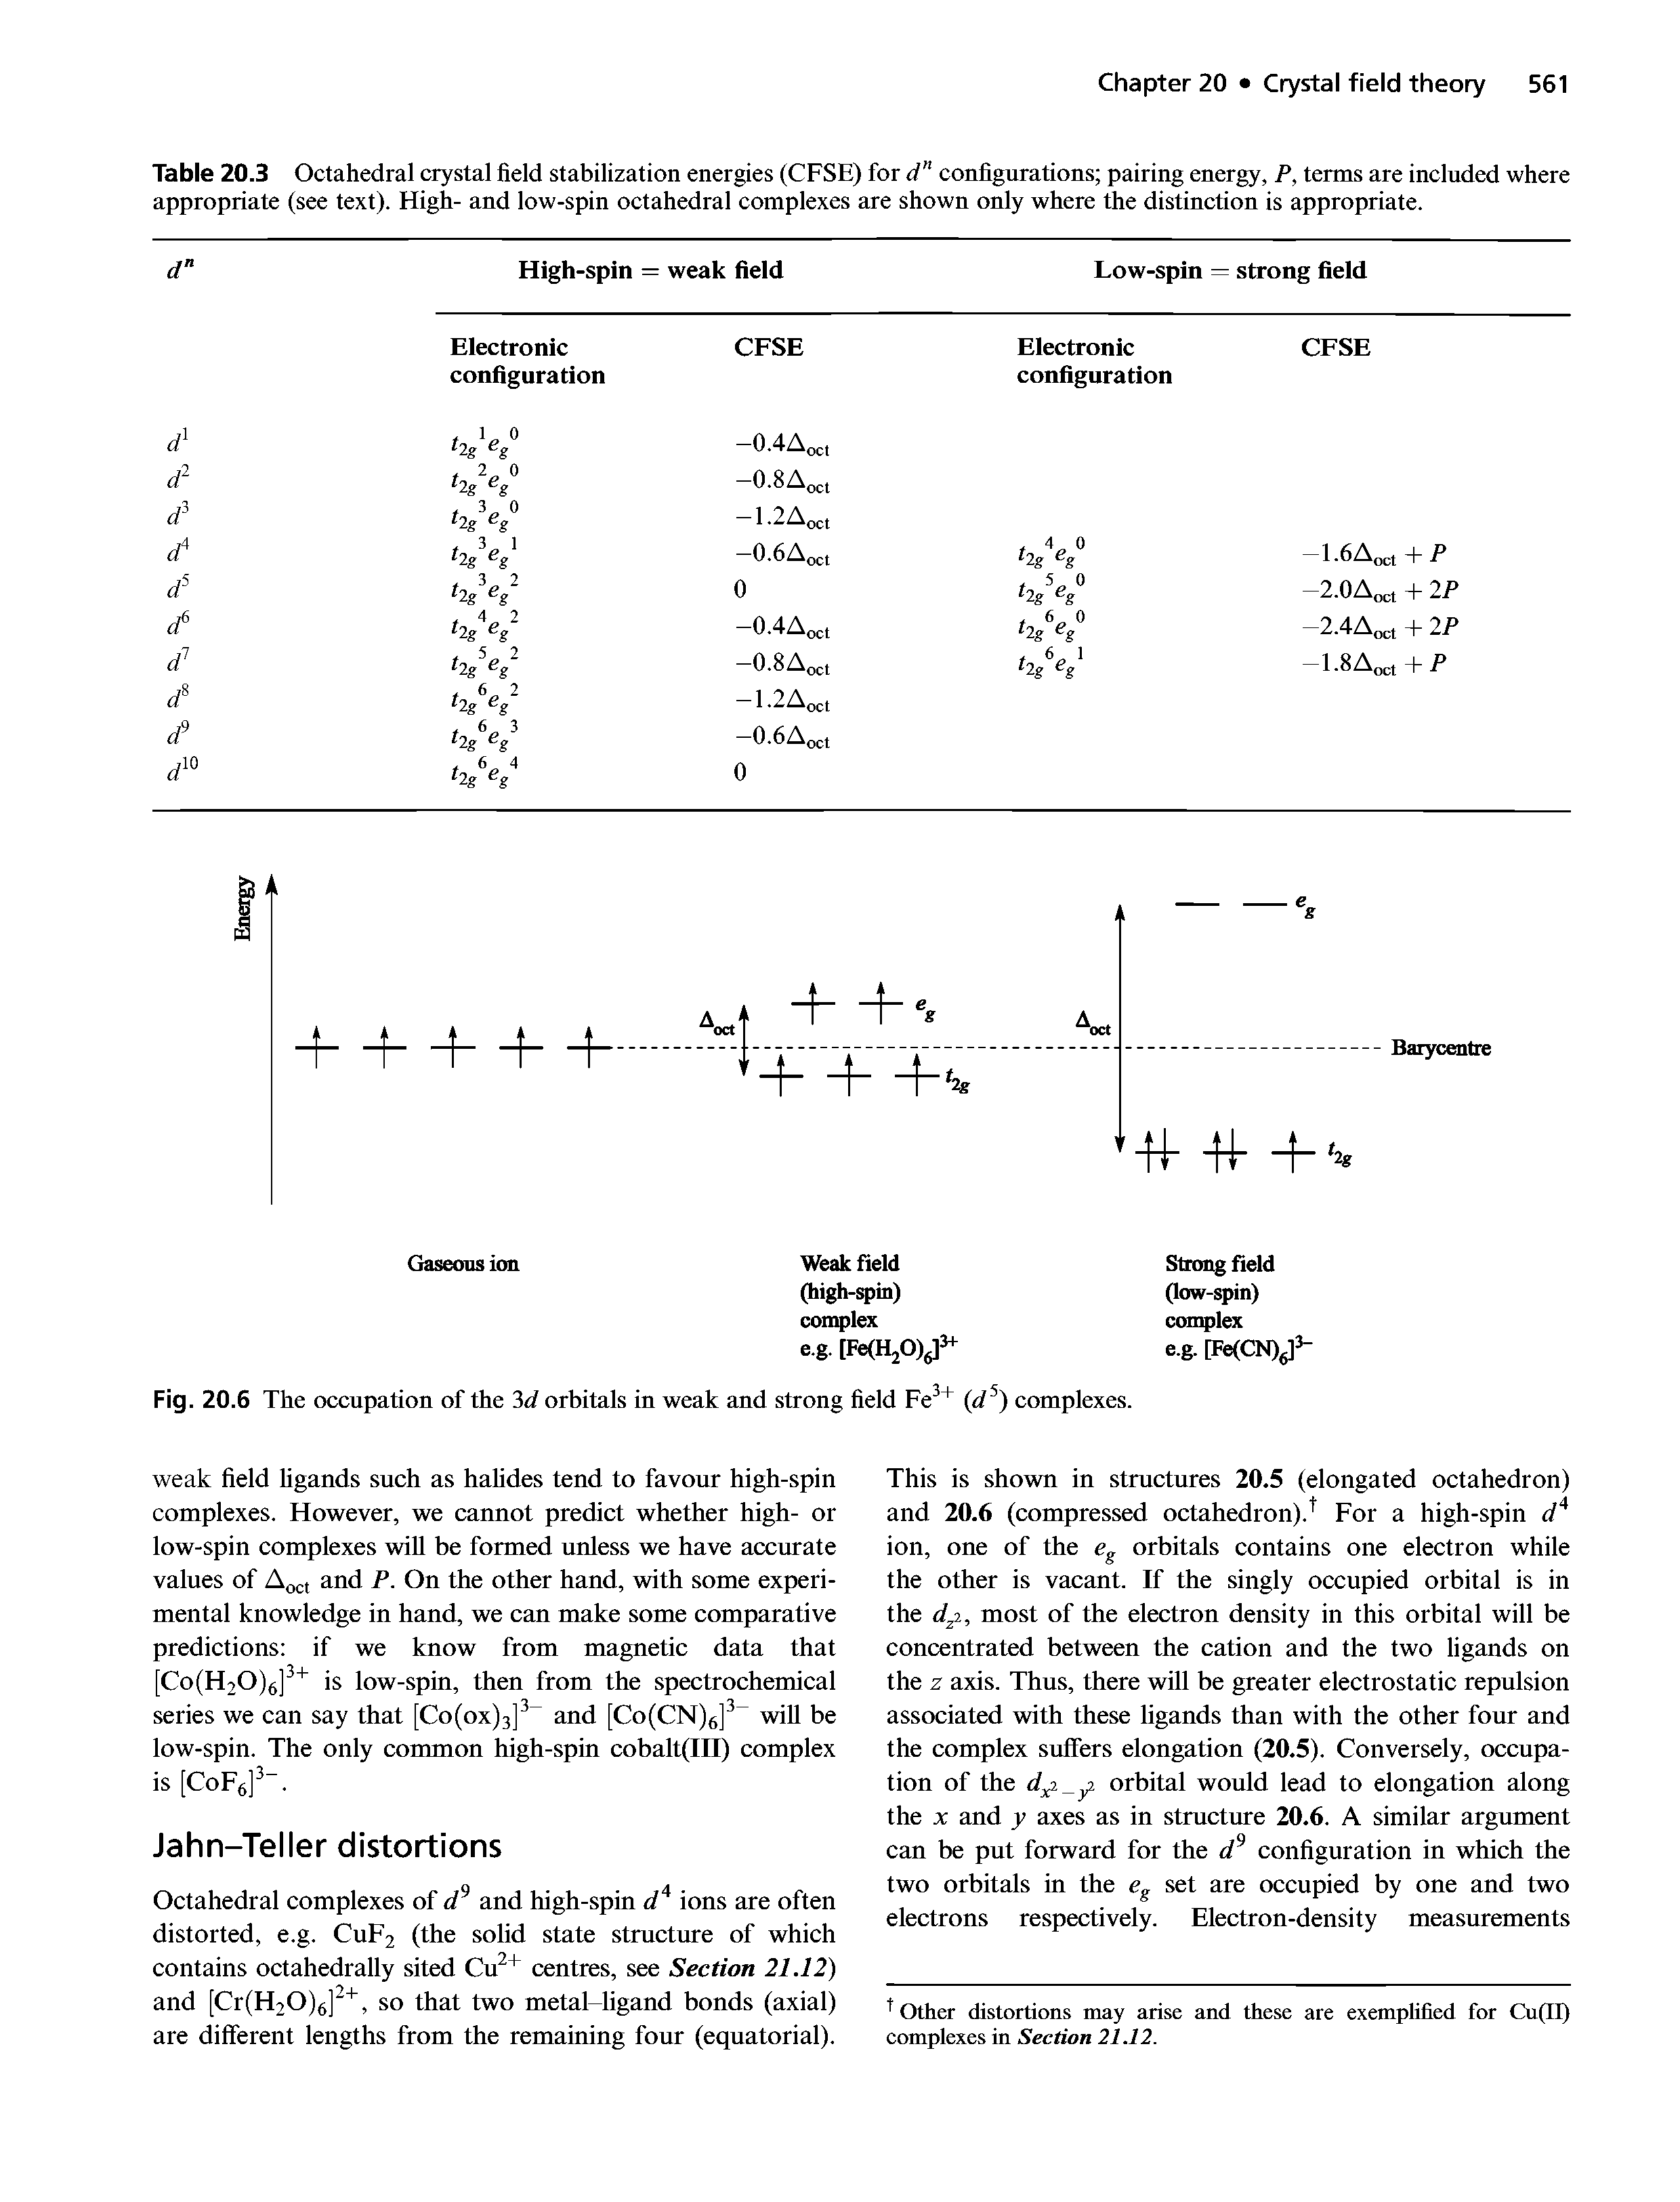 Table 20.3 Octahedral crystal field stabilization energies (CFSE) for d configurations pairing energy, P, terms are included where appropriate (see text). High- and low-spin octahedral complexes are shown only where the distinction is appropriate.